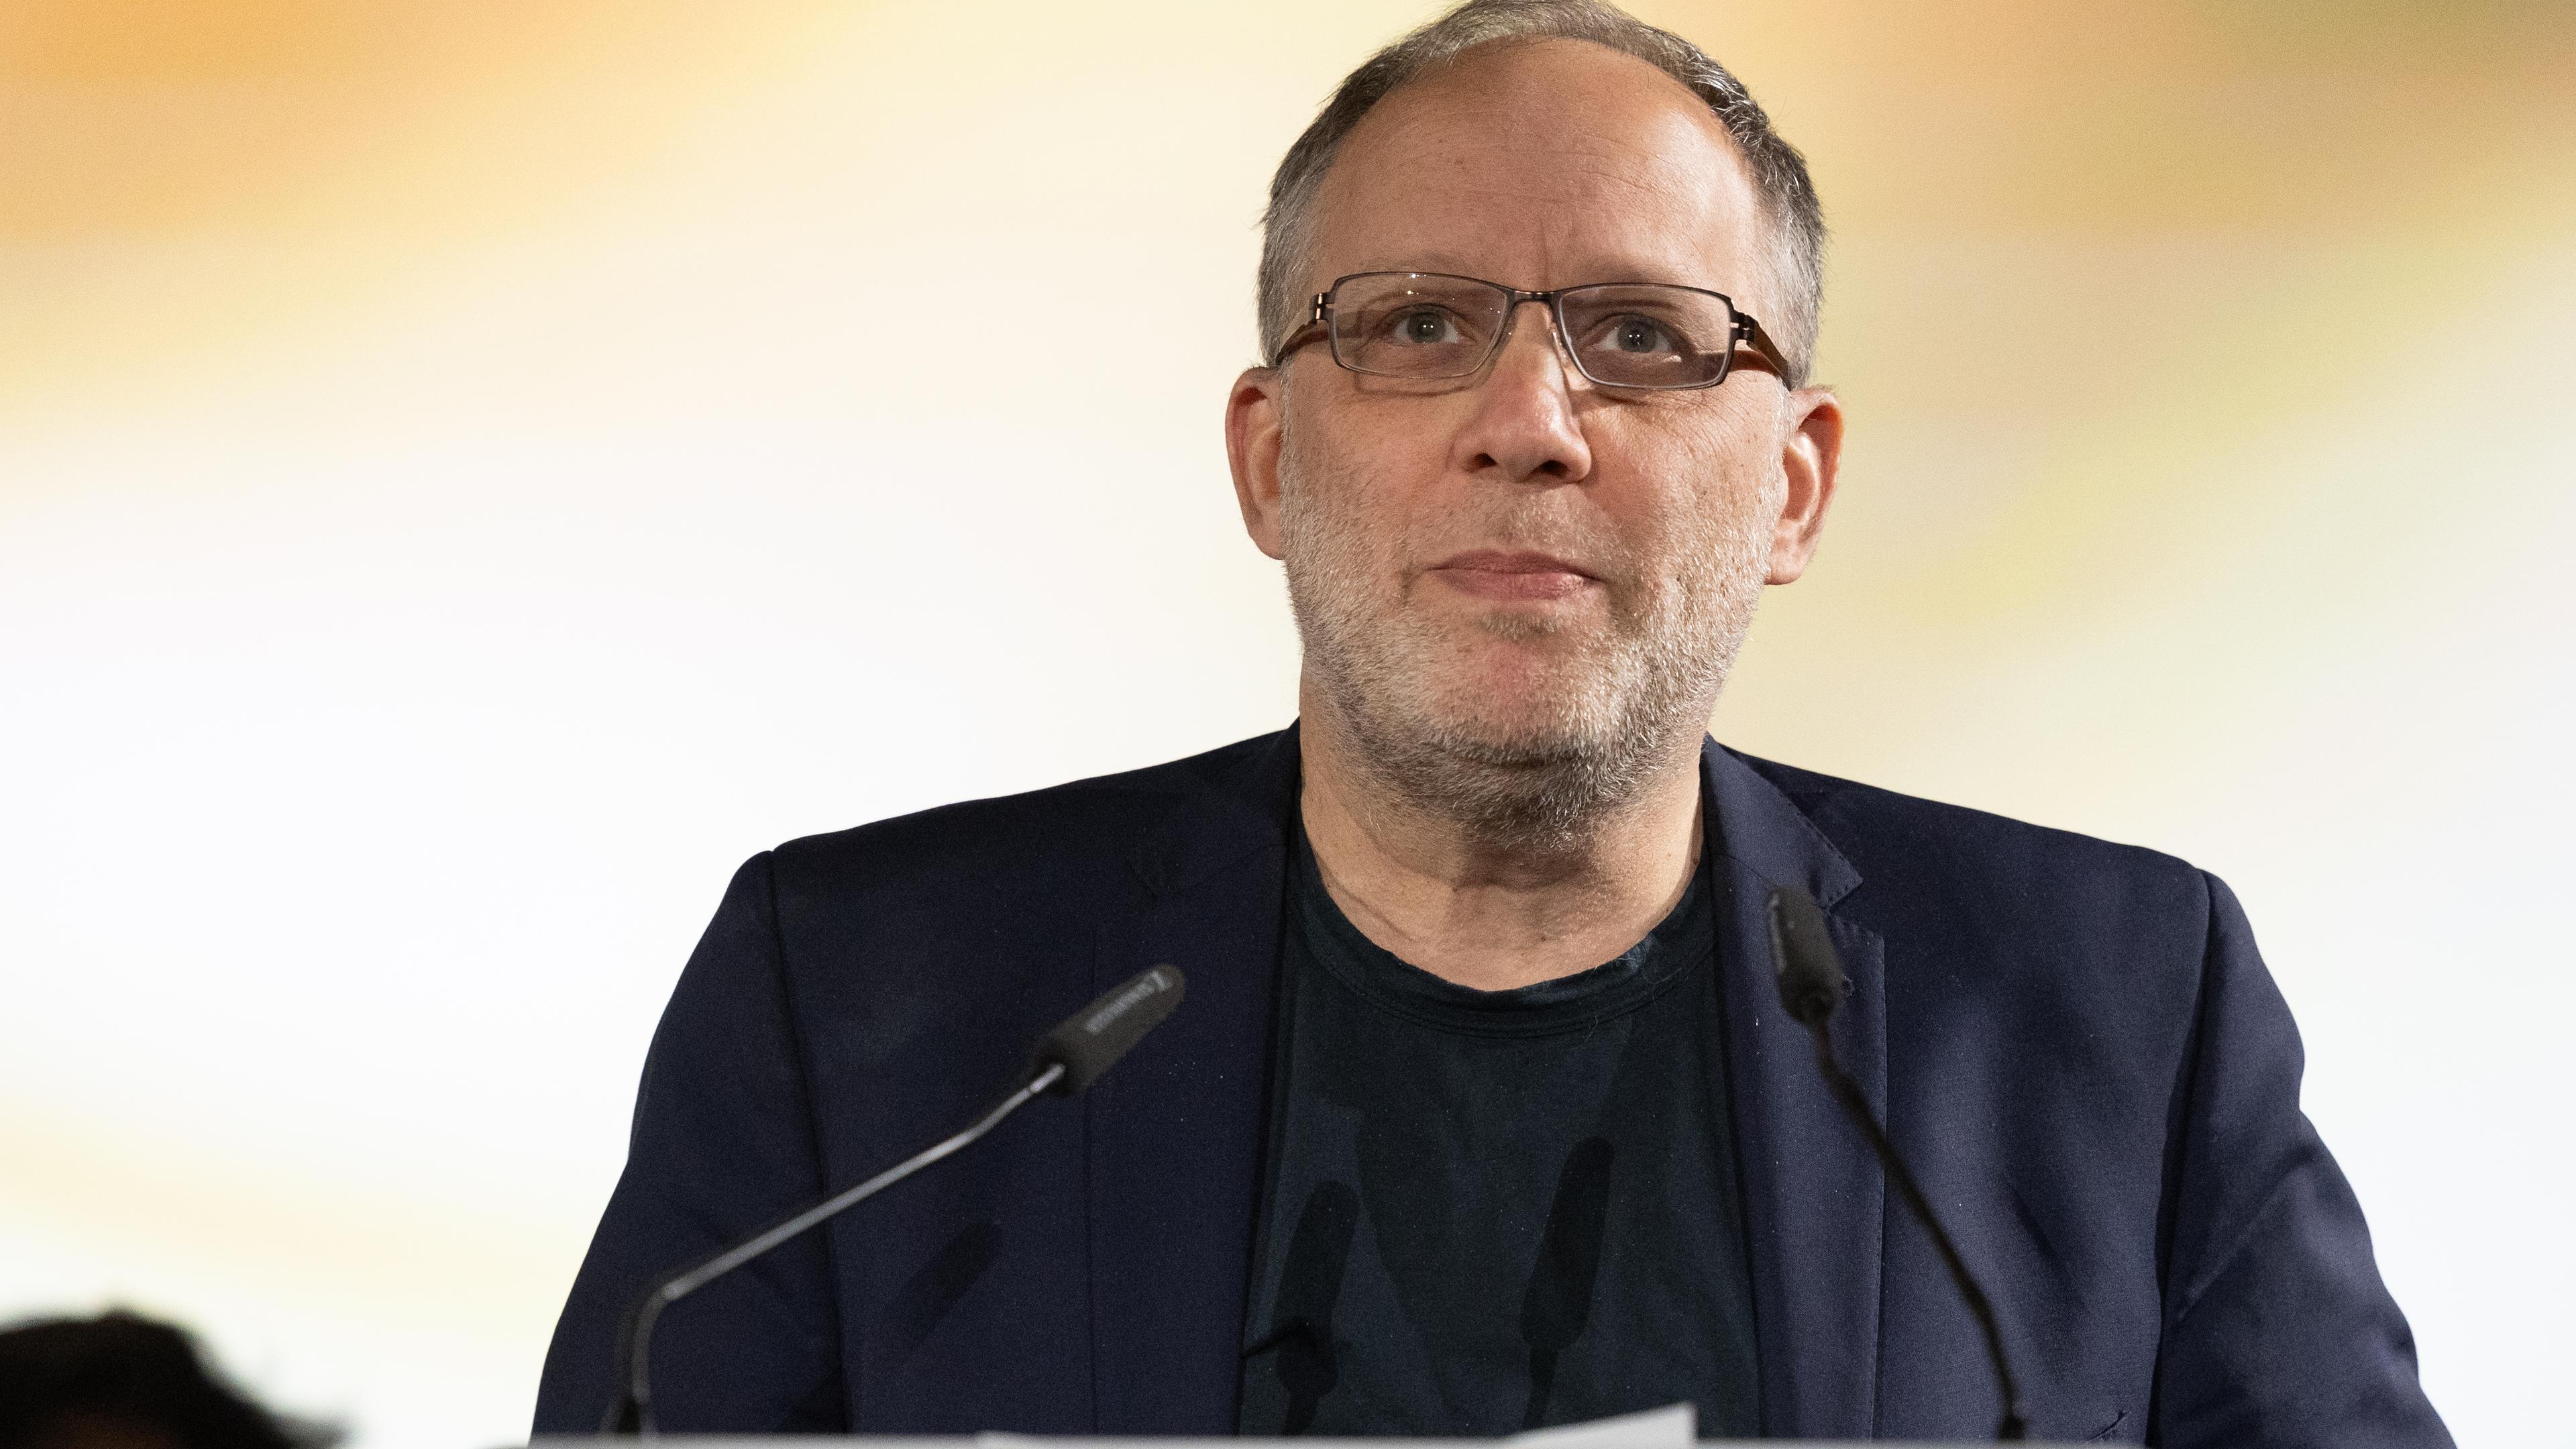 Ira Sachs at the awards ceremony at this year’s Luxembourg City Film Festival